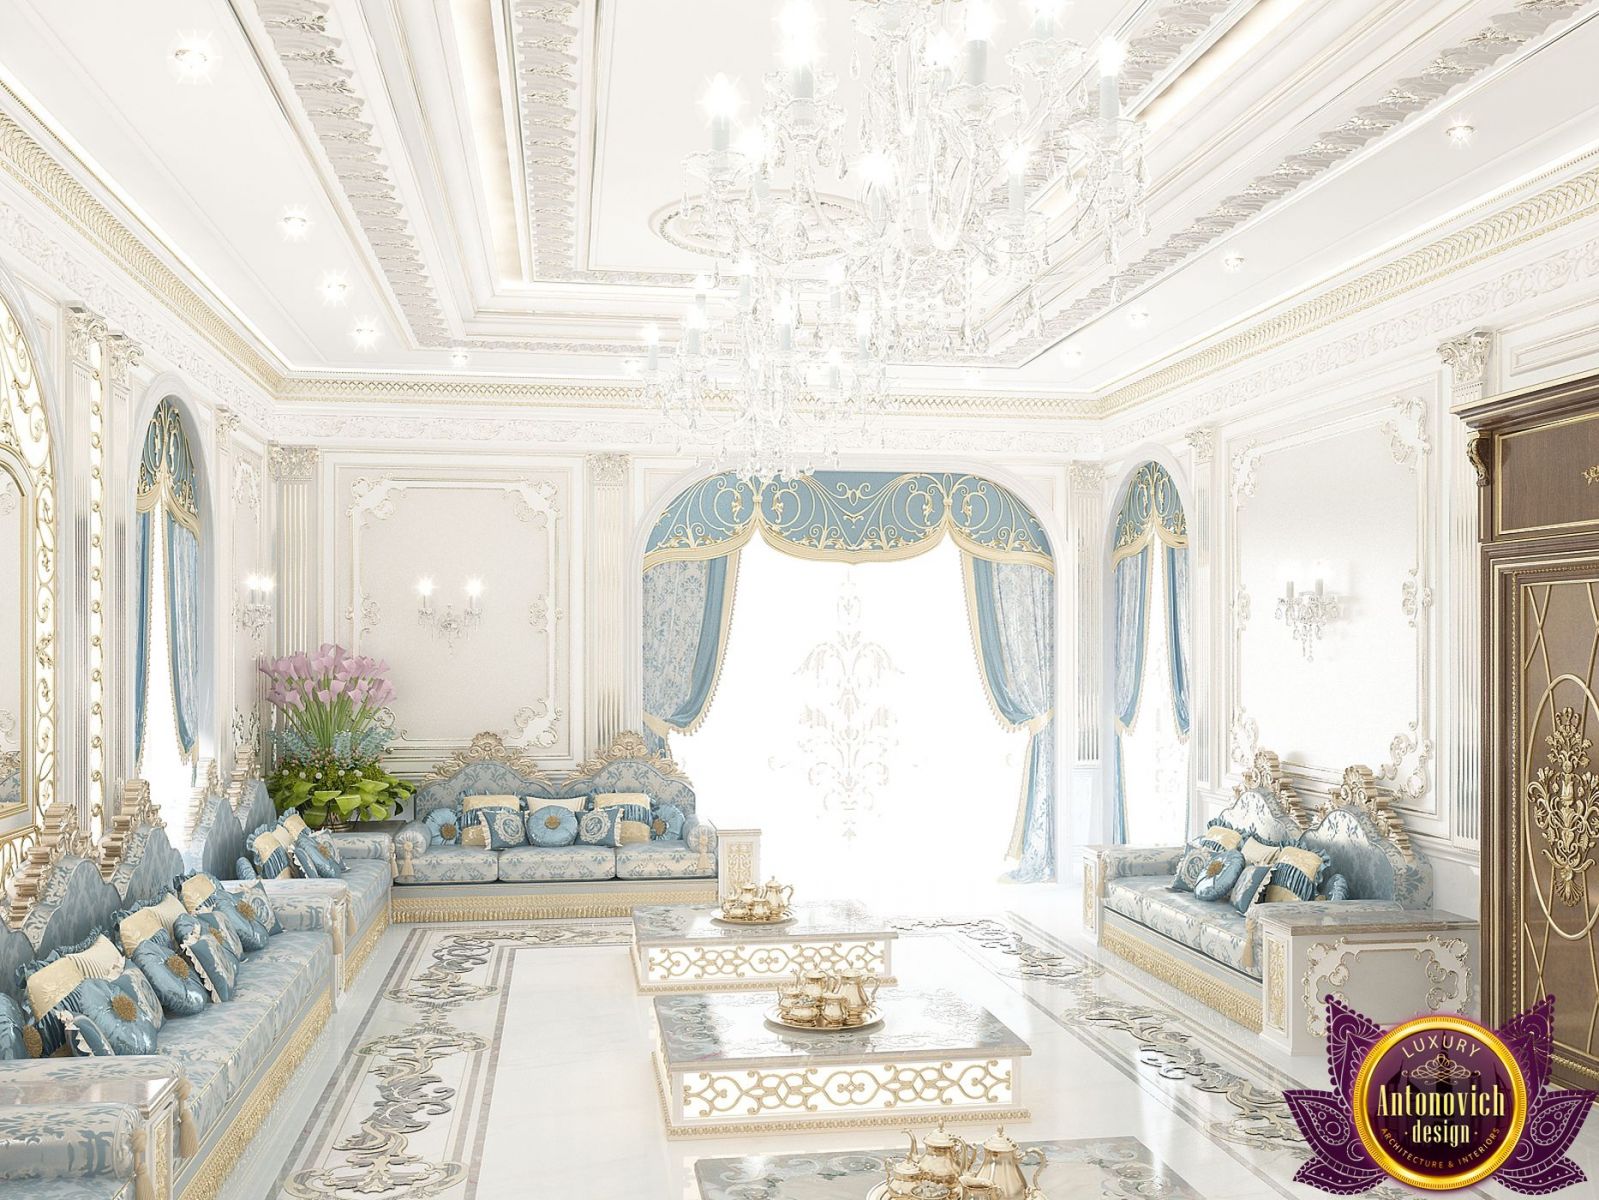 Elegant Majlis with gold accents and plush seating